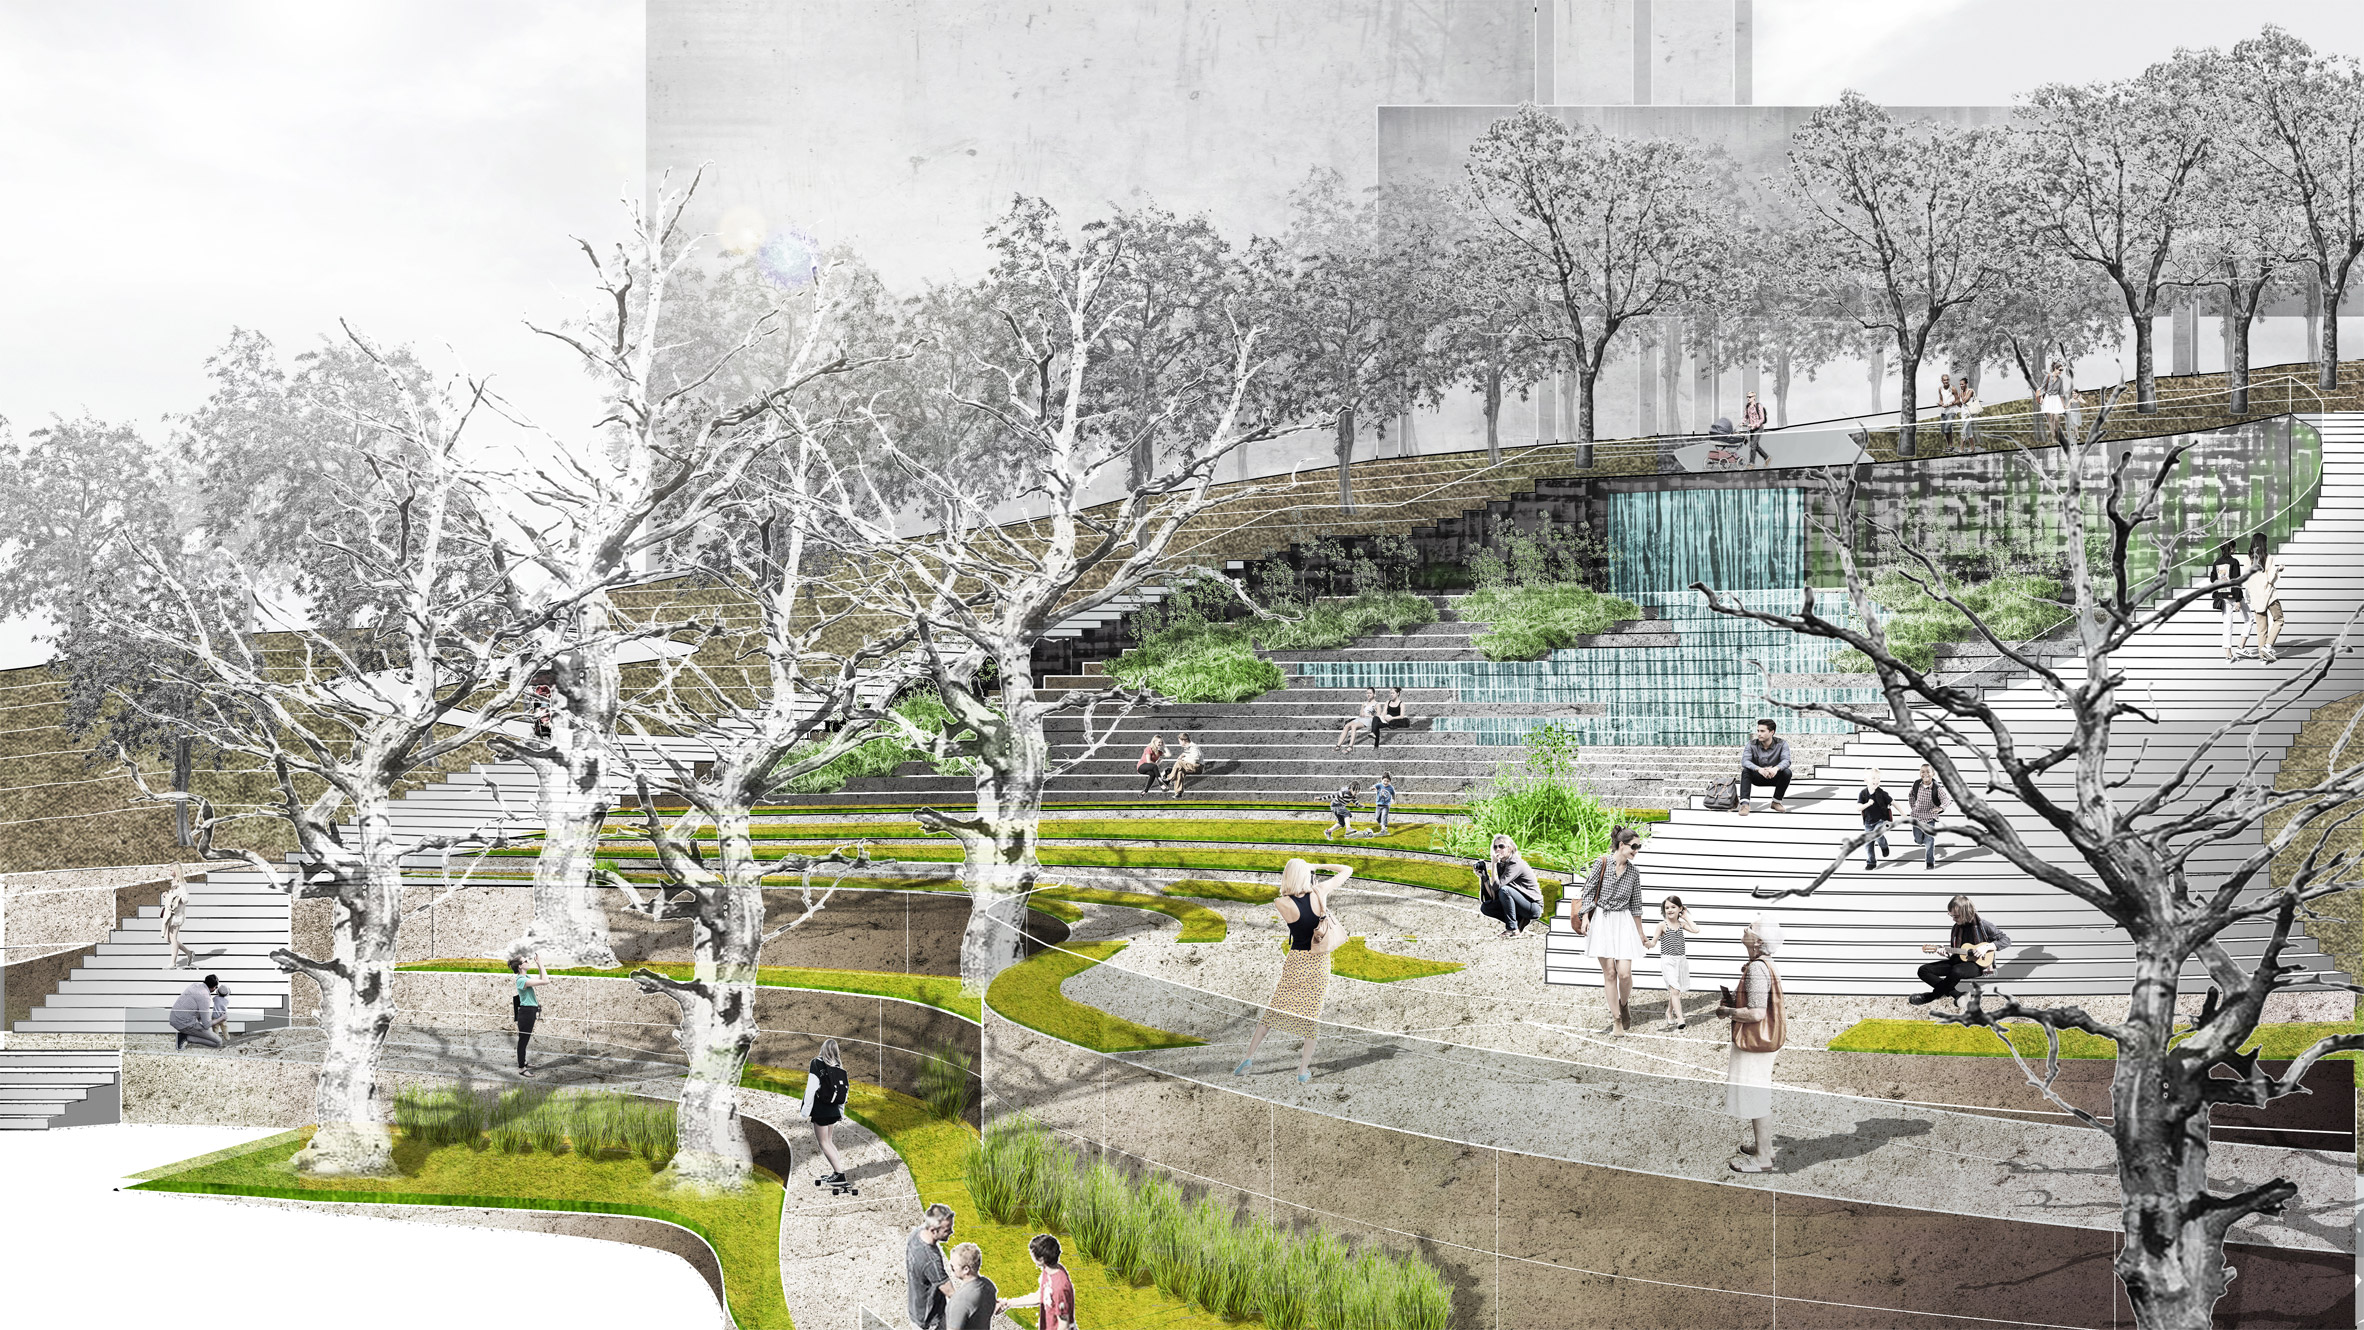 Collage render of a landscape architecture project